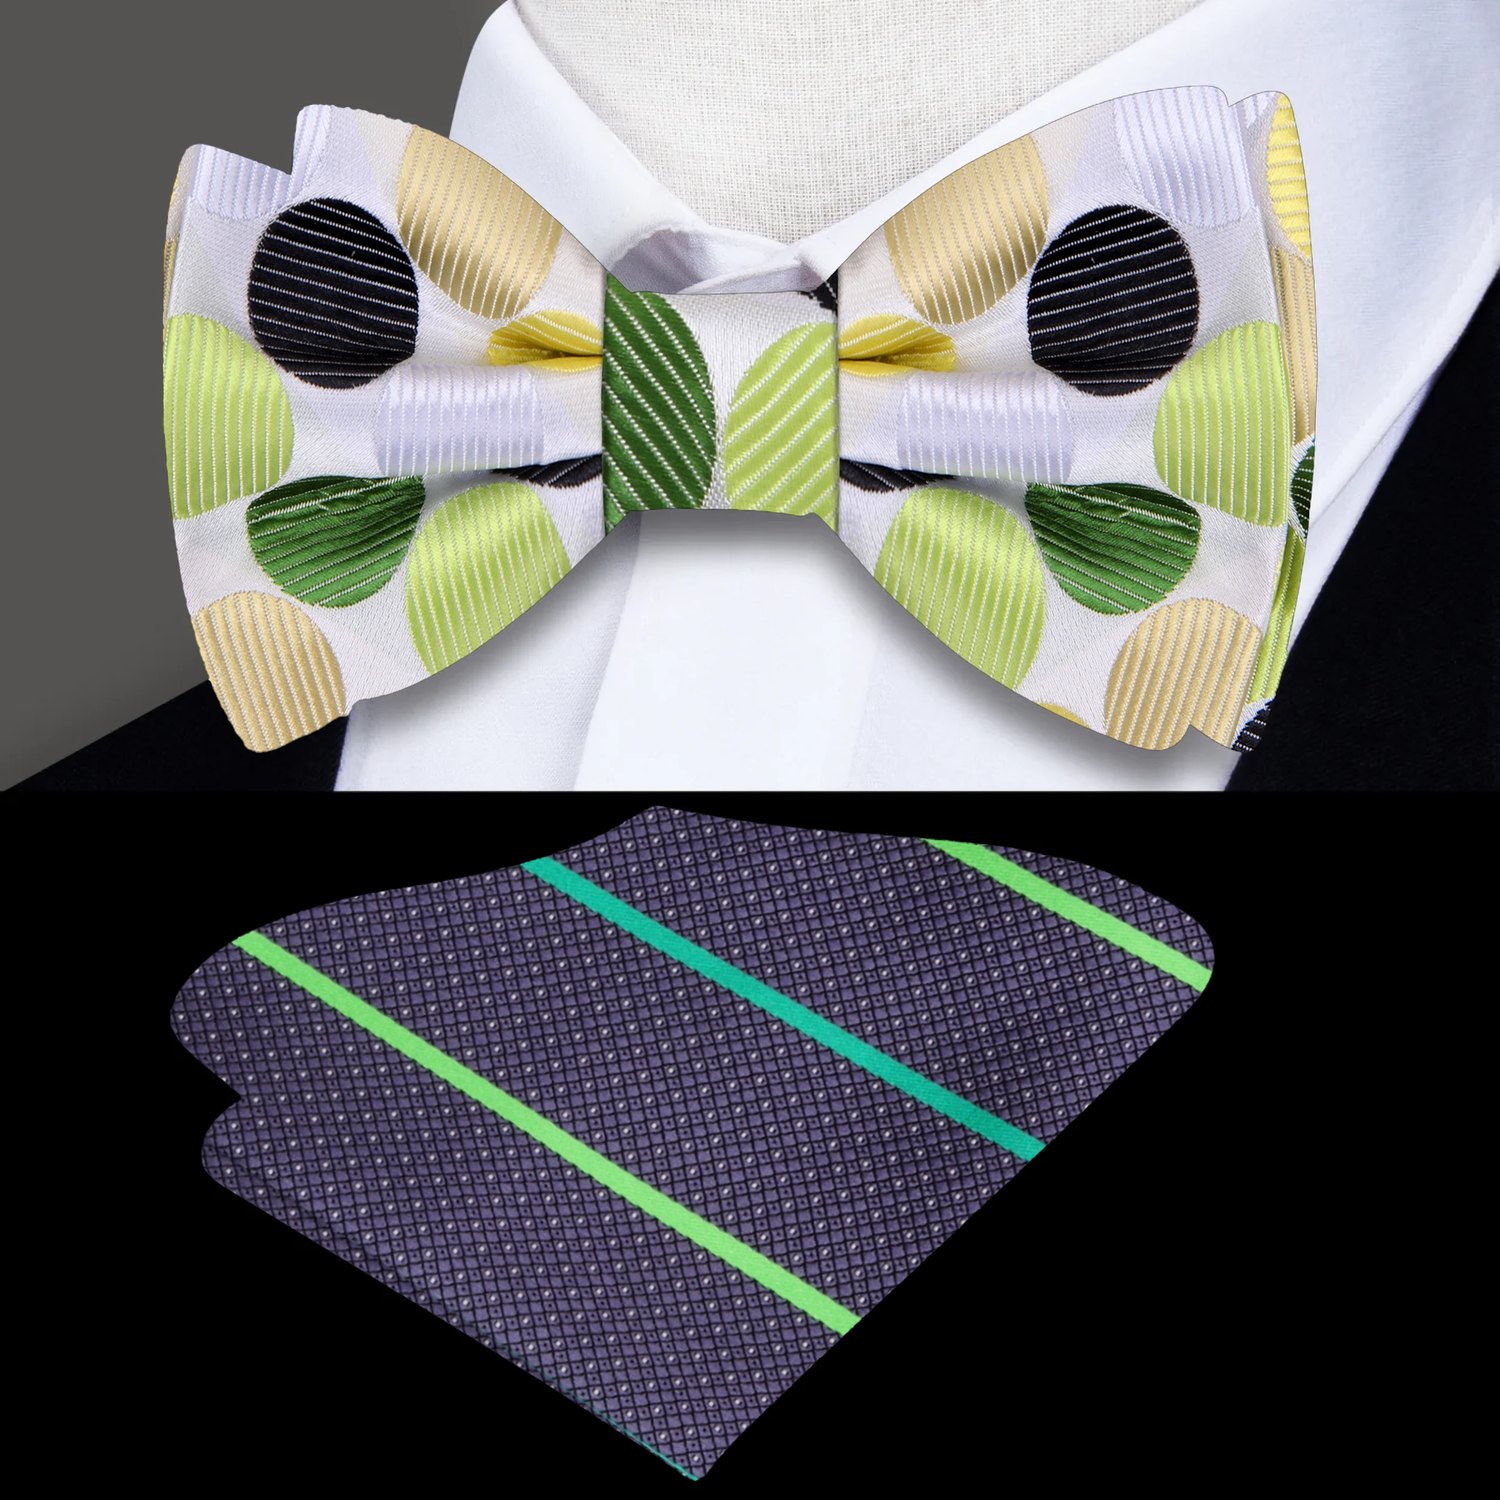 Main View: White, Green, Yellow Polka Dot Bow Tie and Accenting Grey, Green Stripe Pocket Square